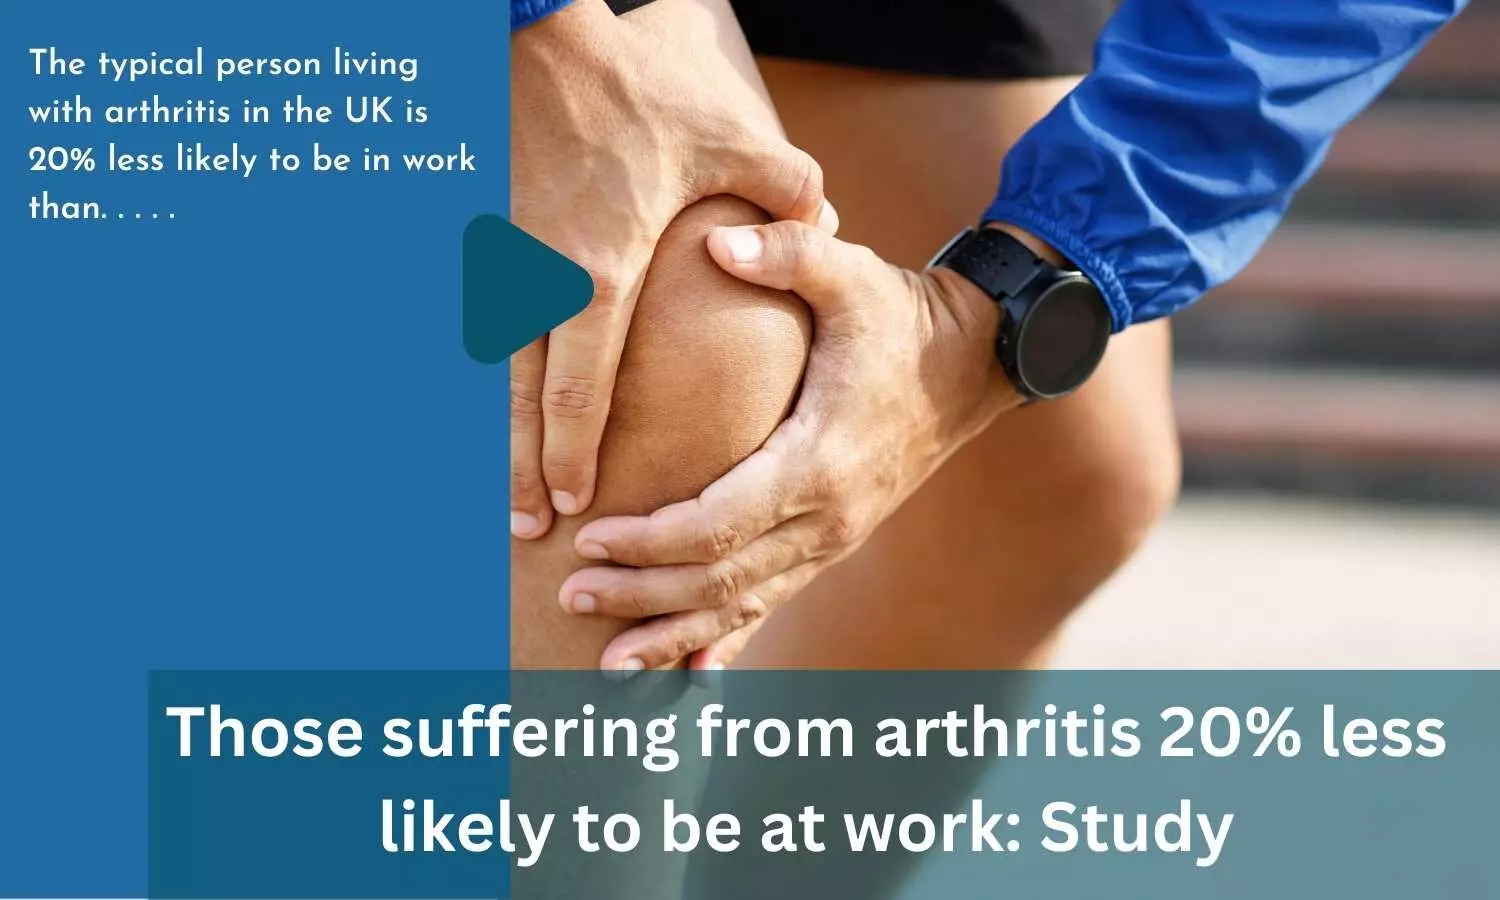 Those suffering from arthritis 20% less likely to be at work: Study